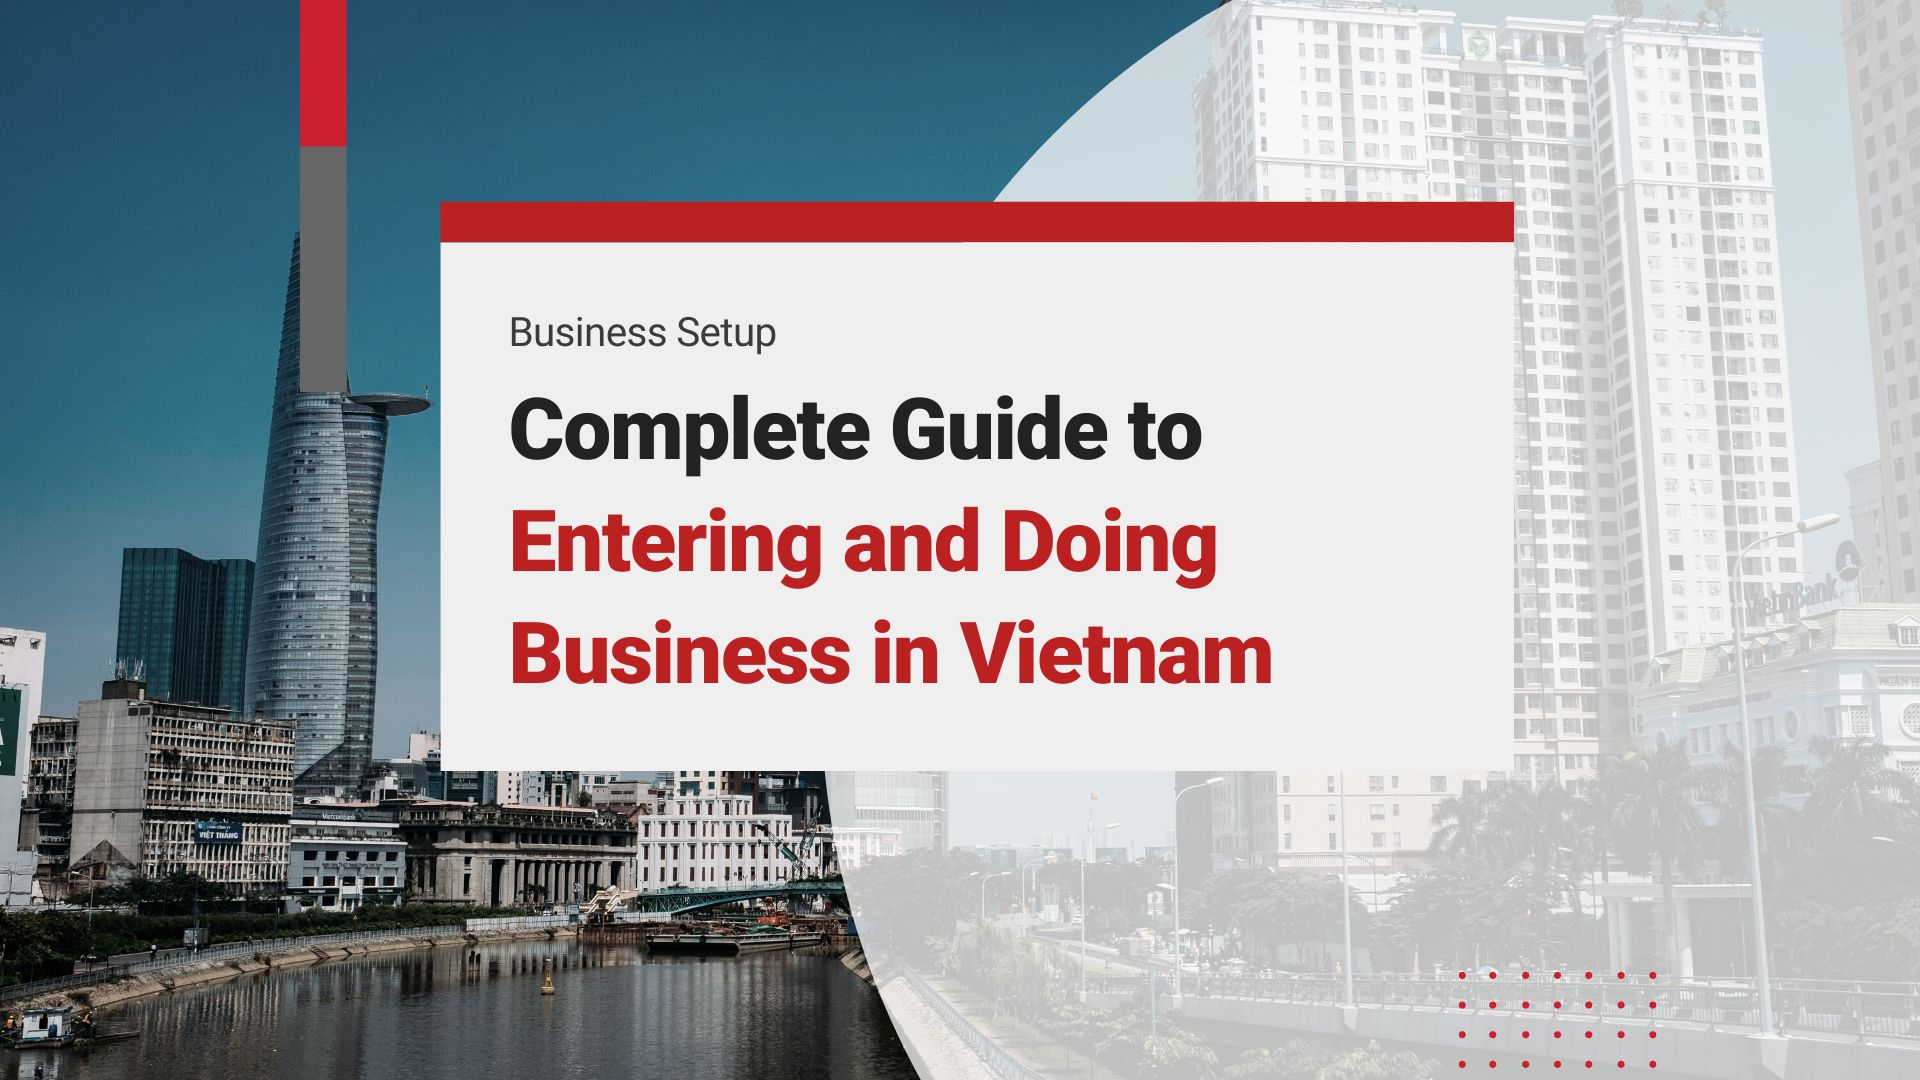 Doing Business in Vietnam as a Foreign Investor: What, Where, Why, How?